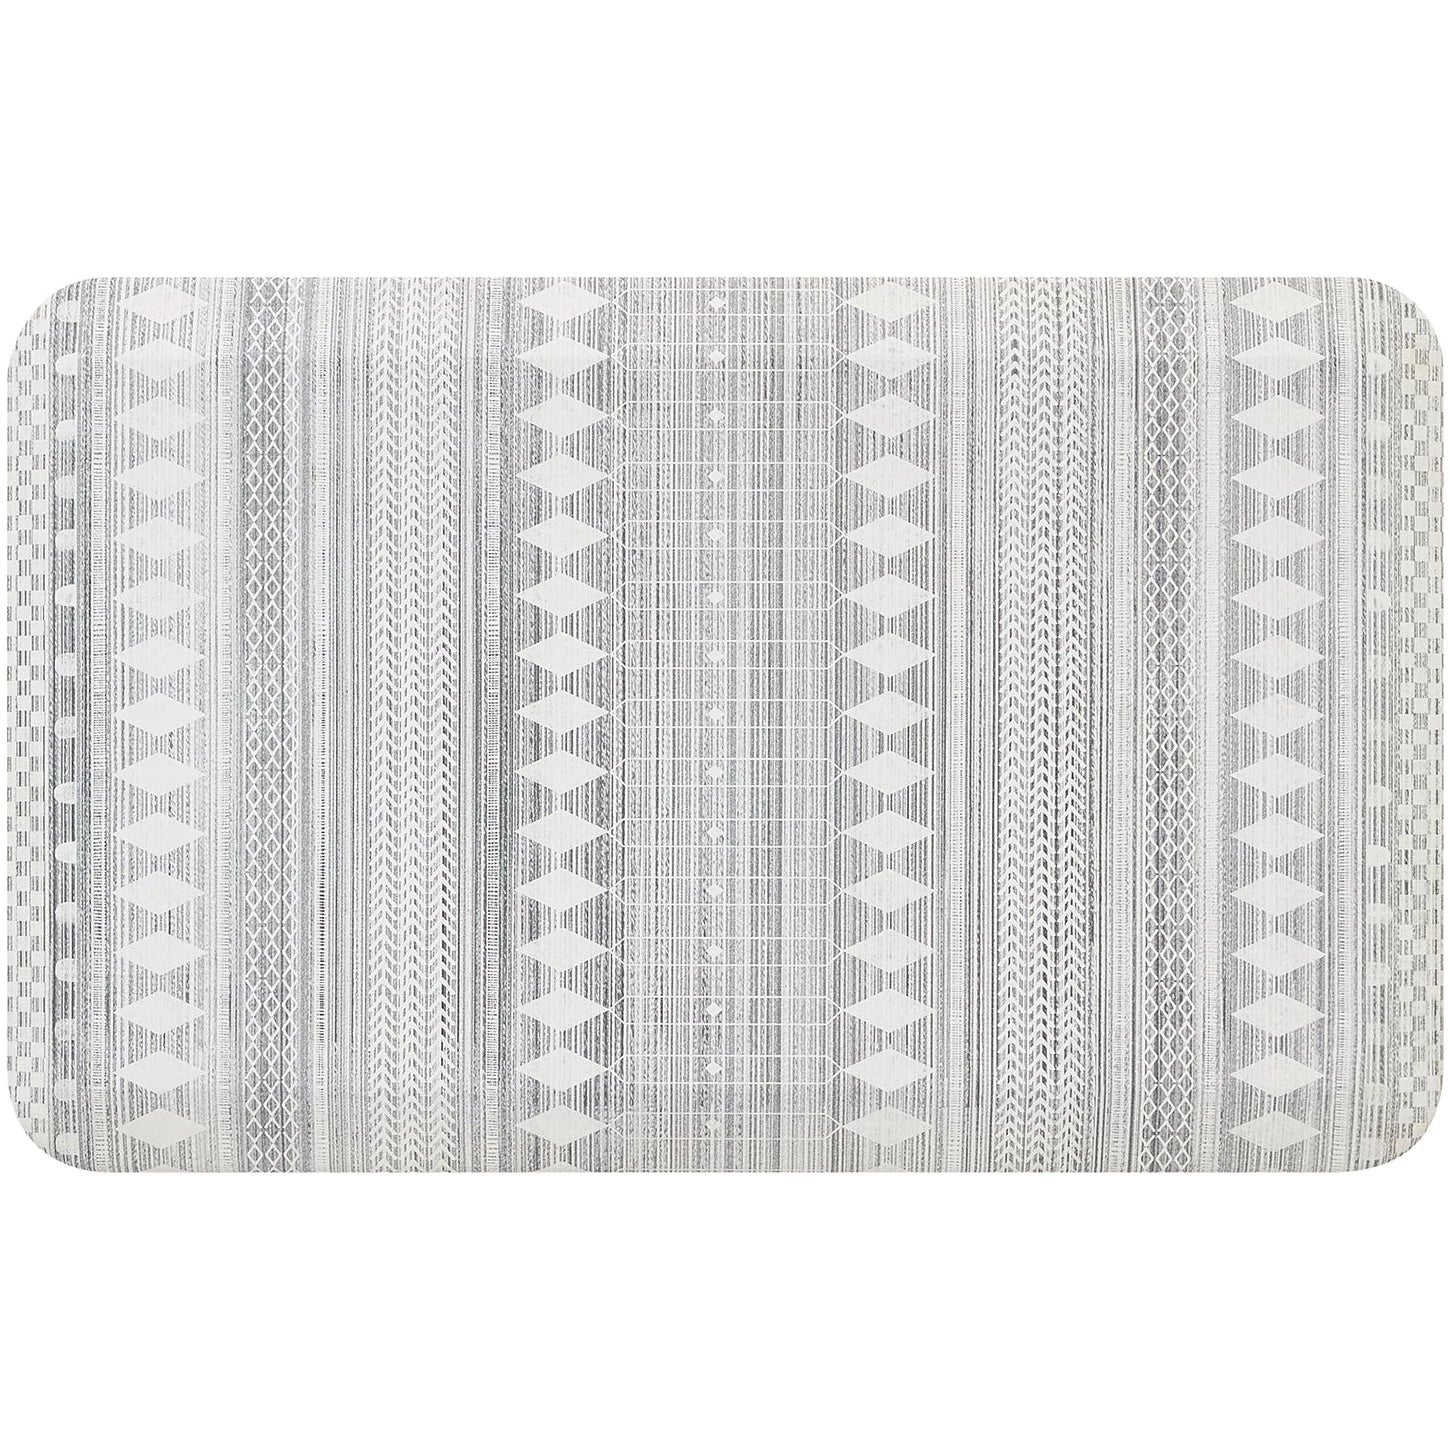 Nordique Fog Gray and White Boho Nordic Print Standing Mat in size 20x32